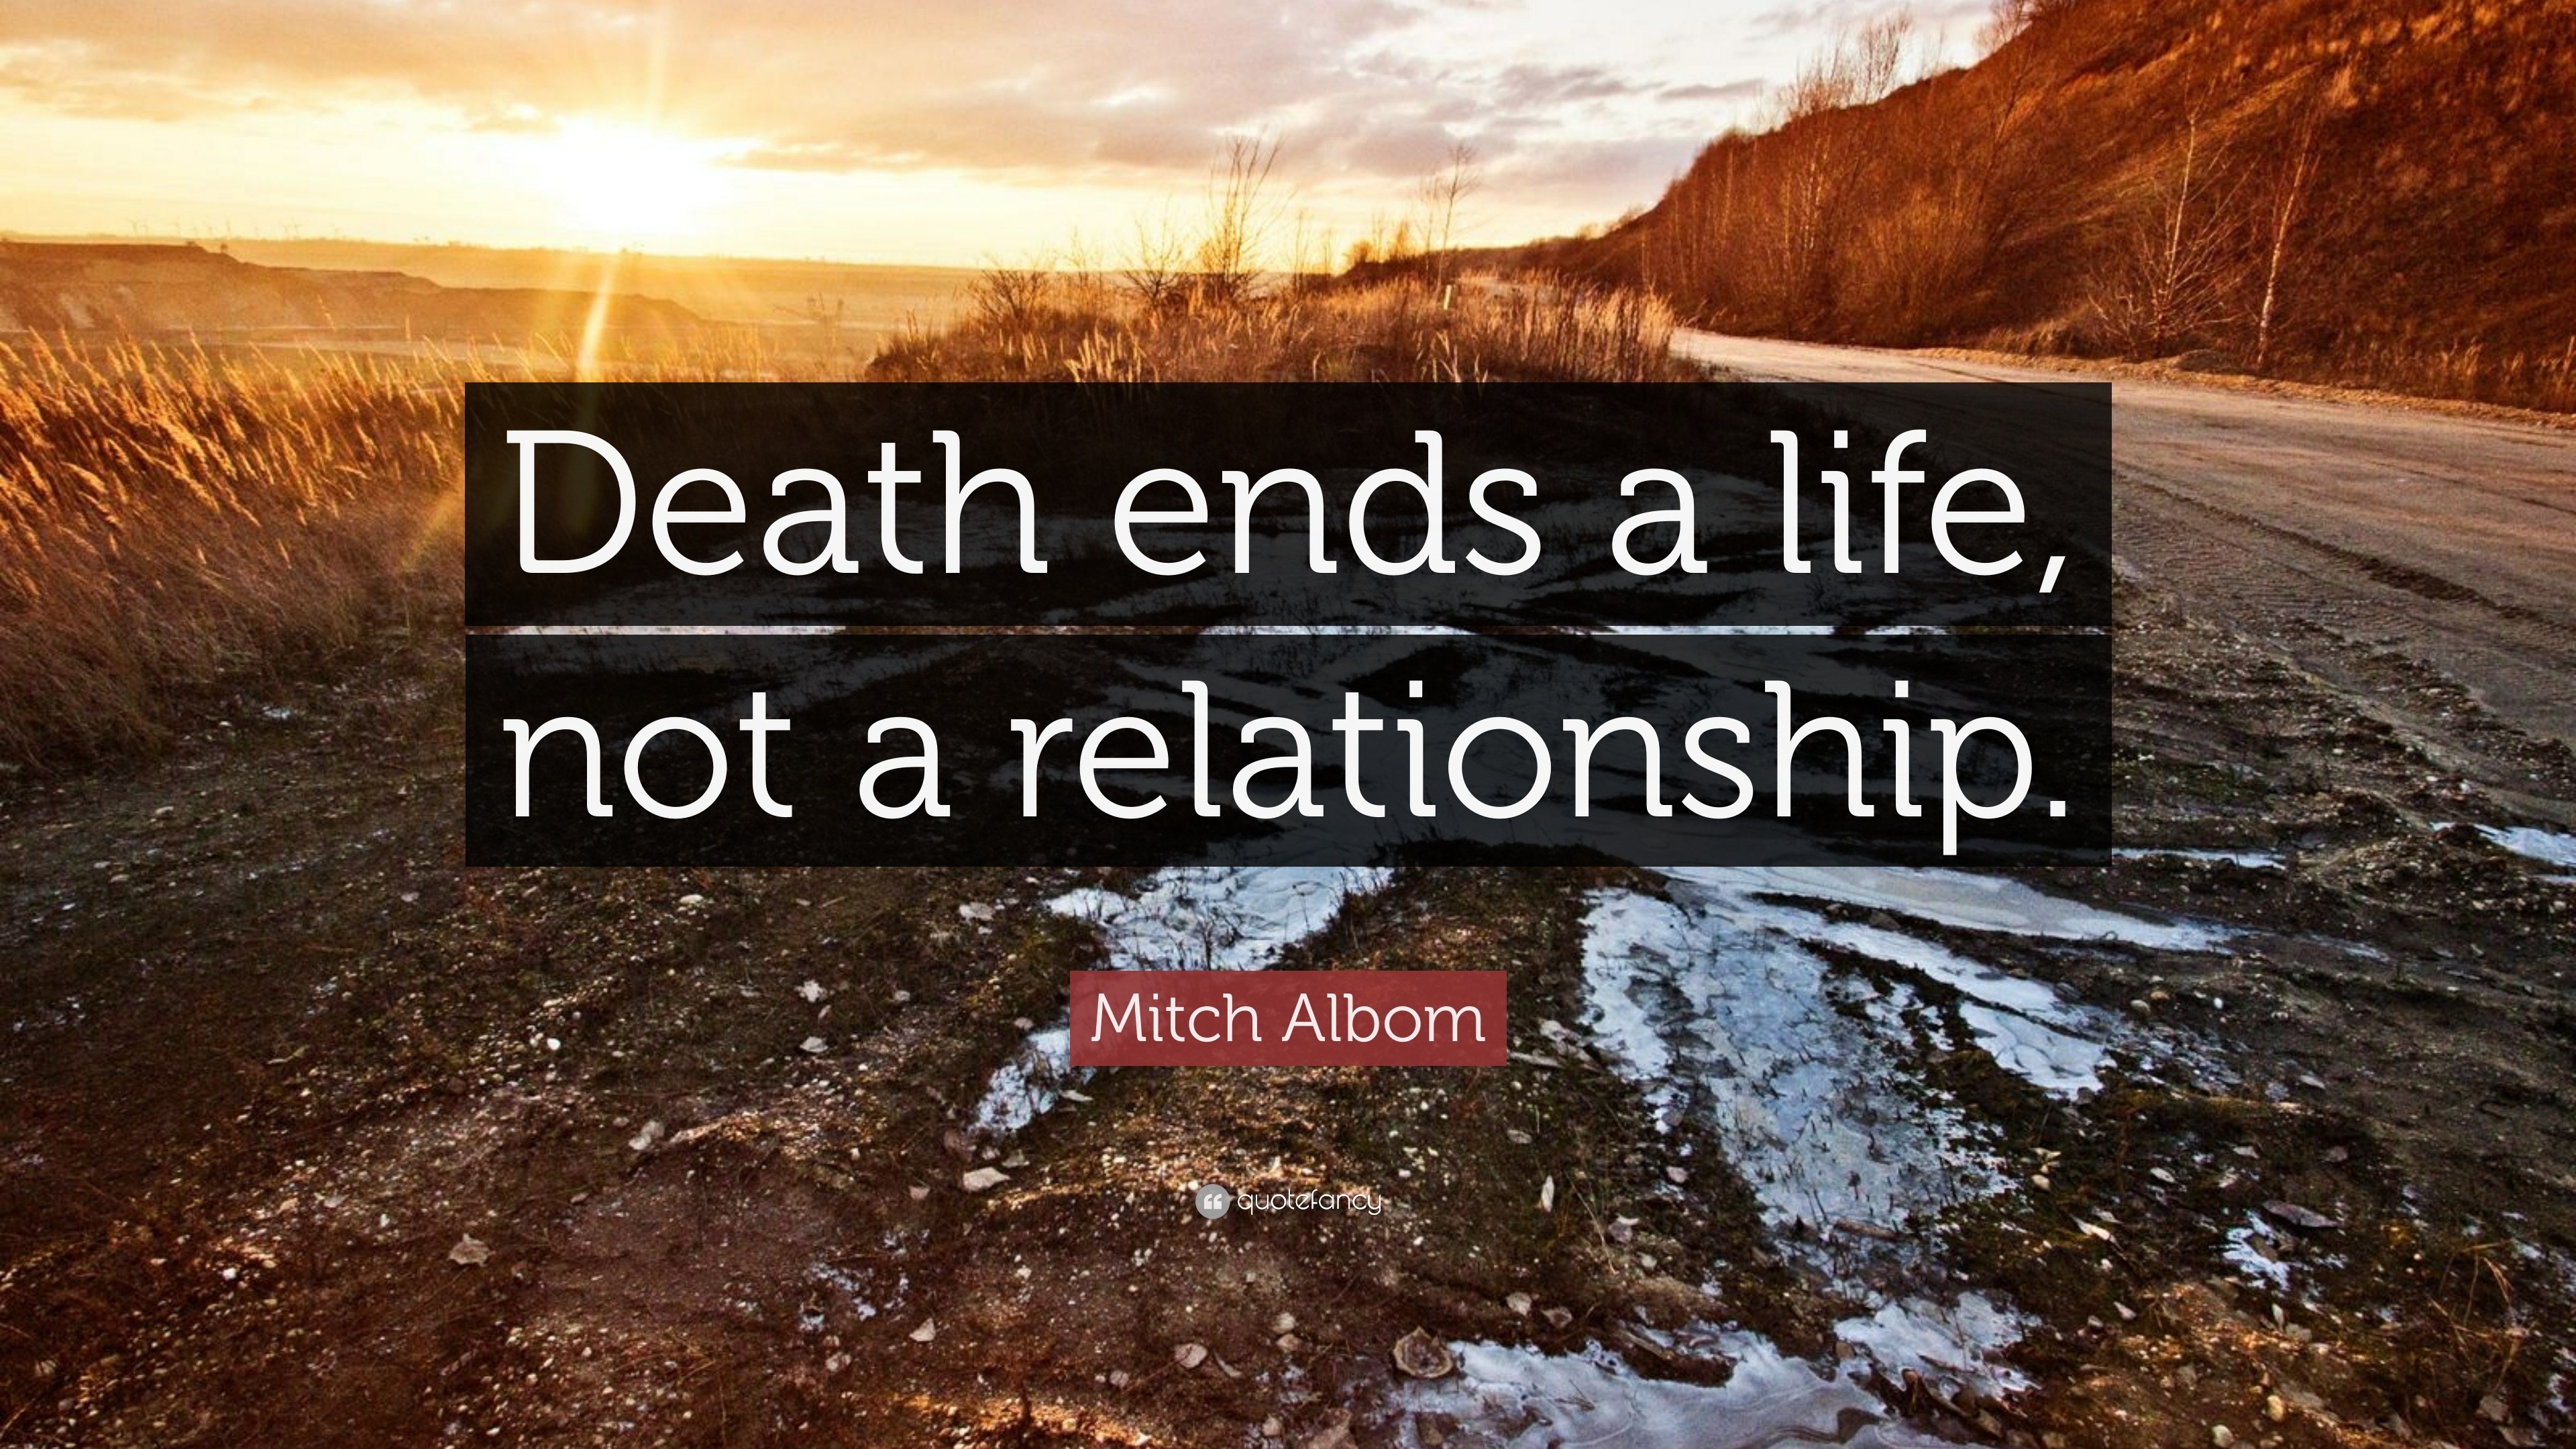 Mitch Albom Quote “Death ends a life, not a relationship